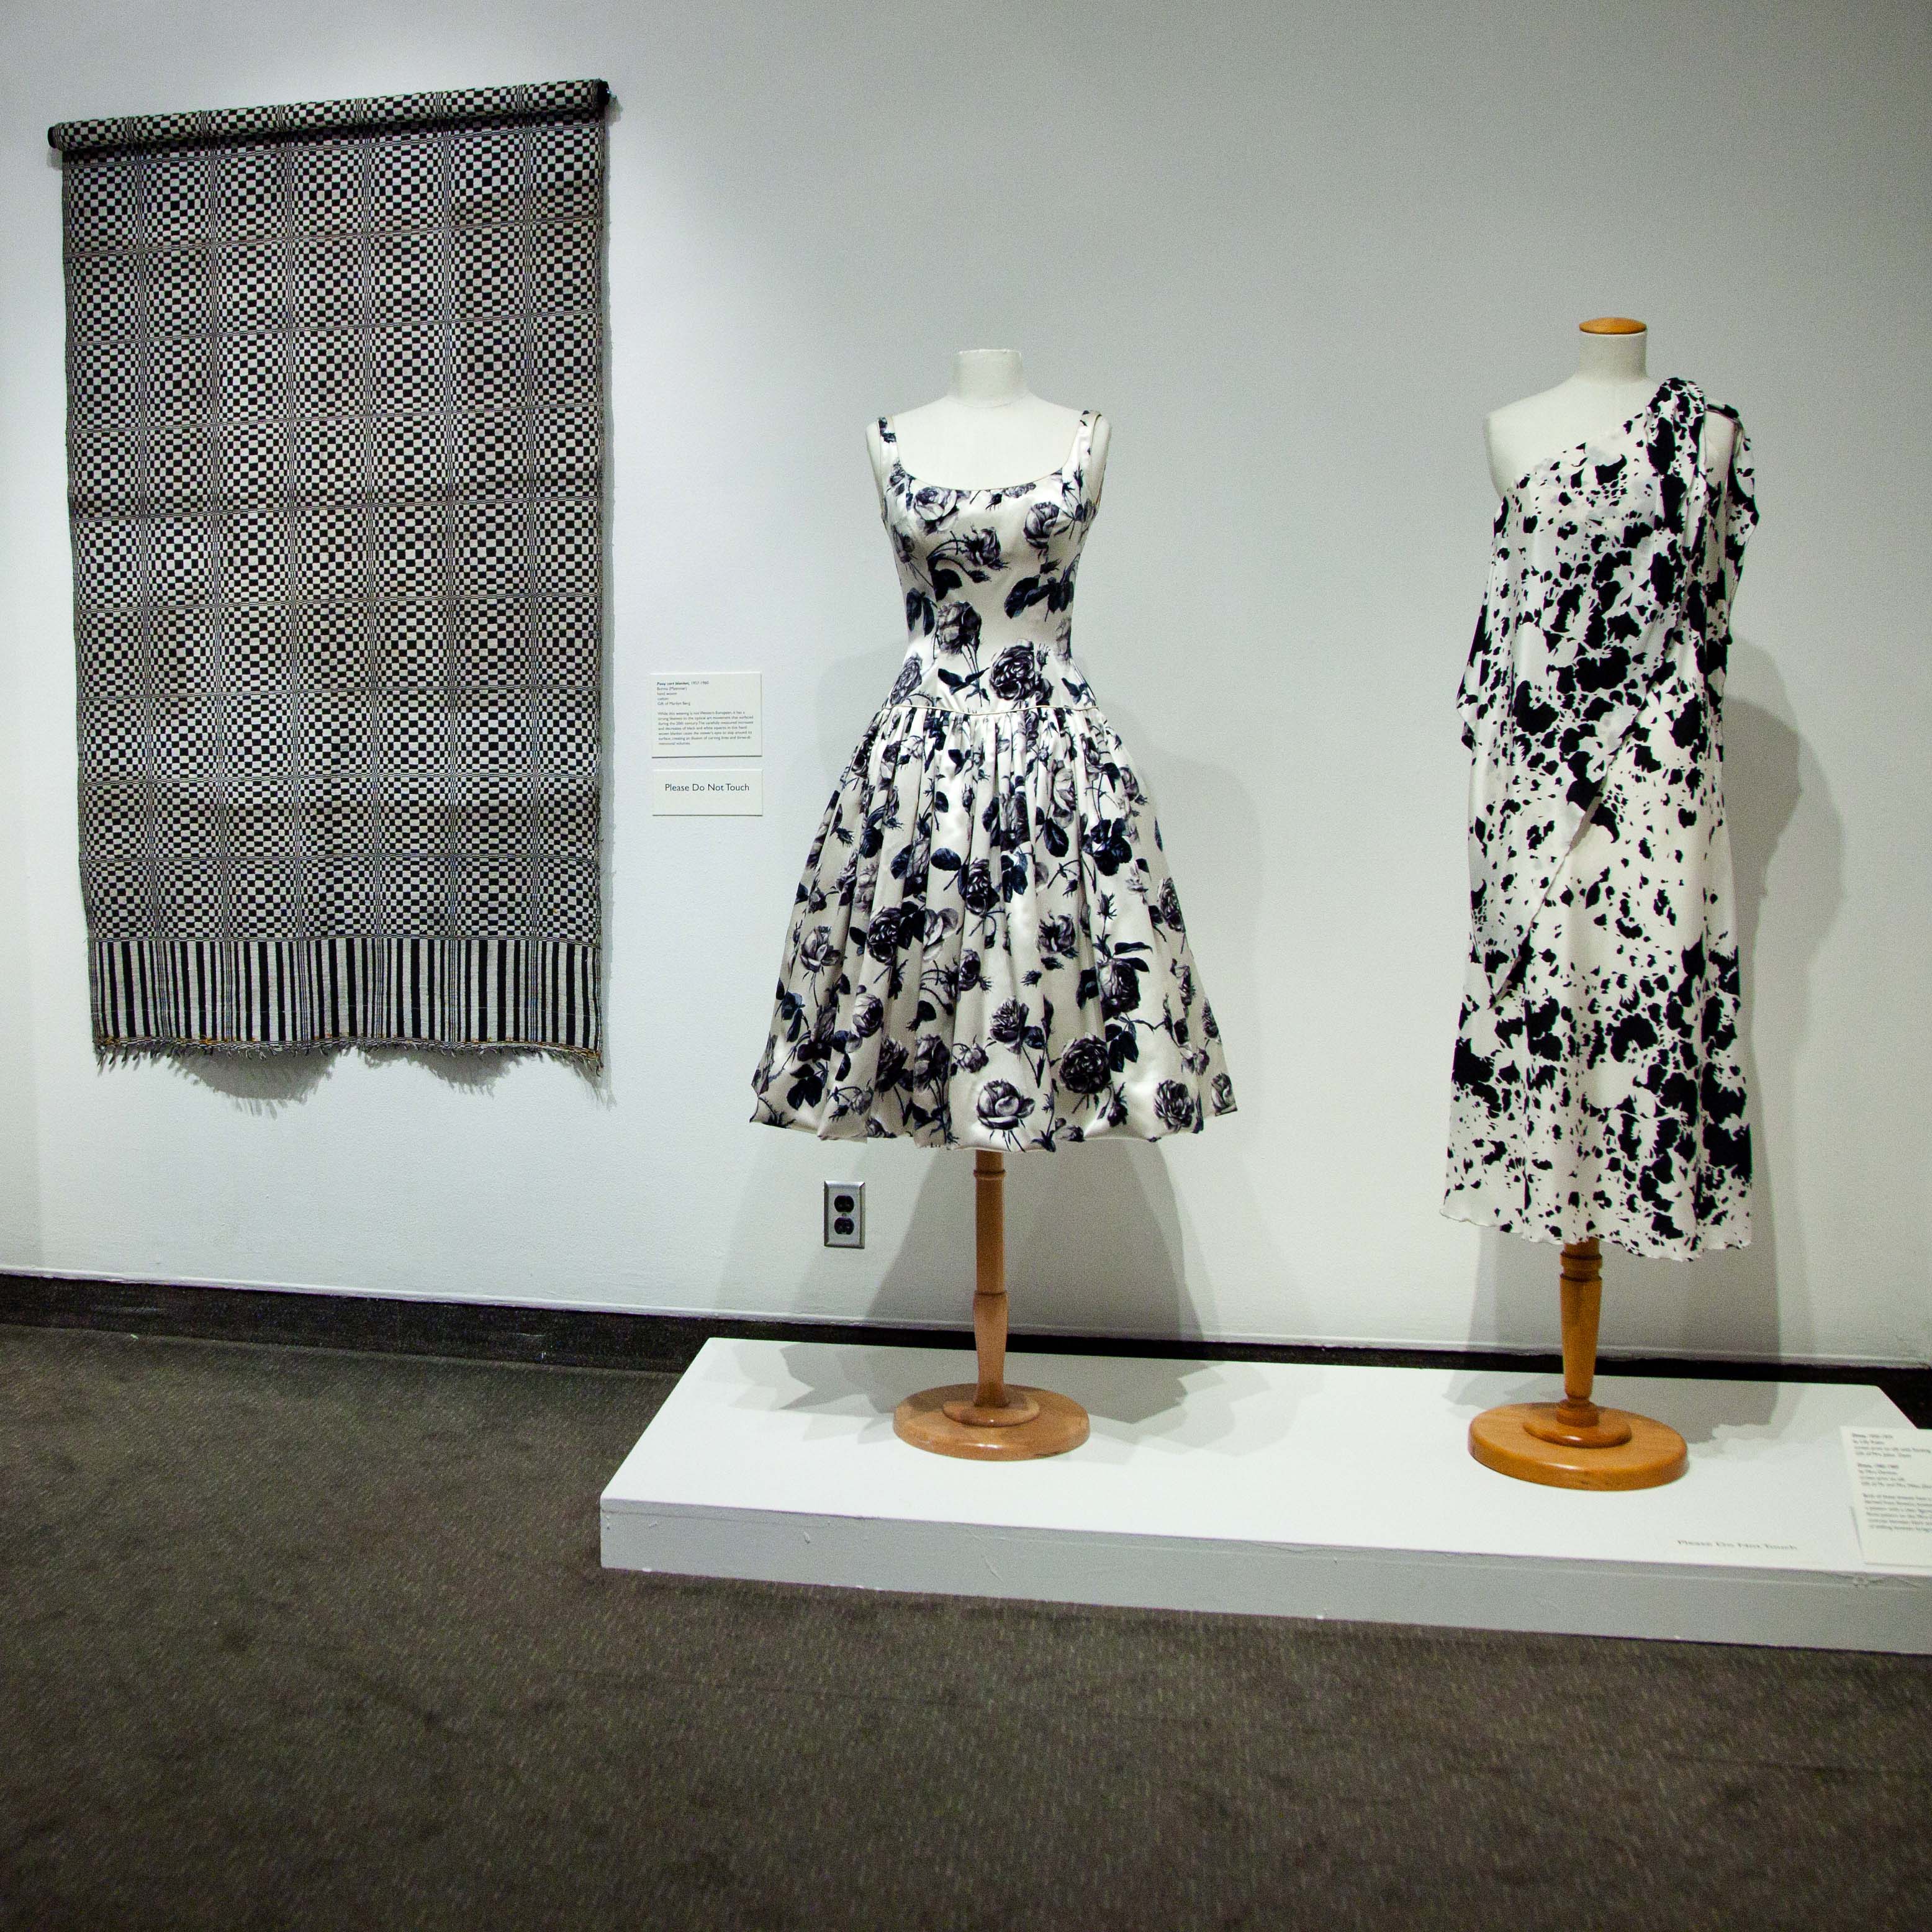 Polarities: Black and White in Design dresses and a wall hanging on display